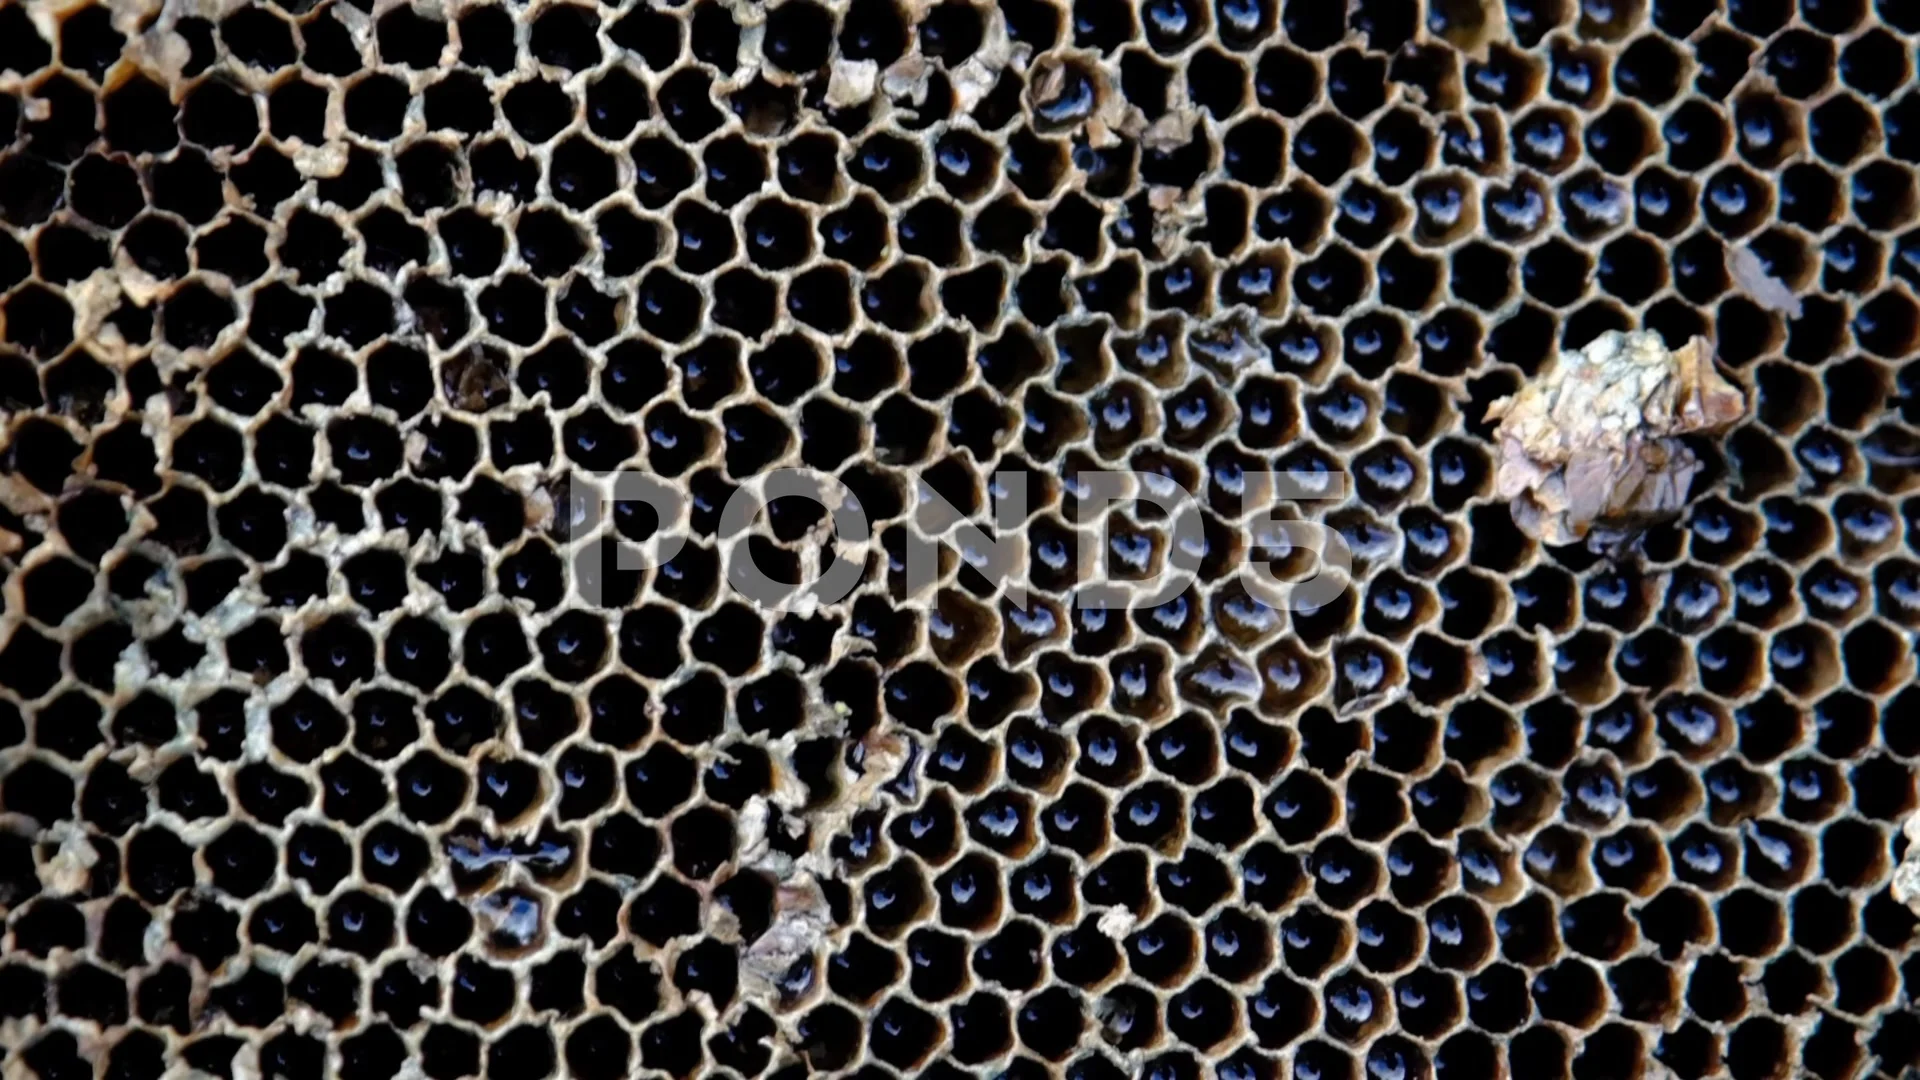 Uncapped honeycomb. Close-up of honeycomb from a honey bee